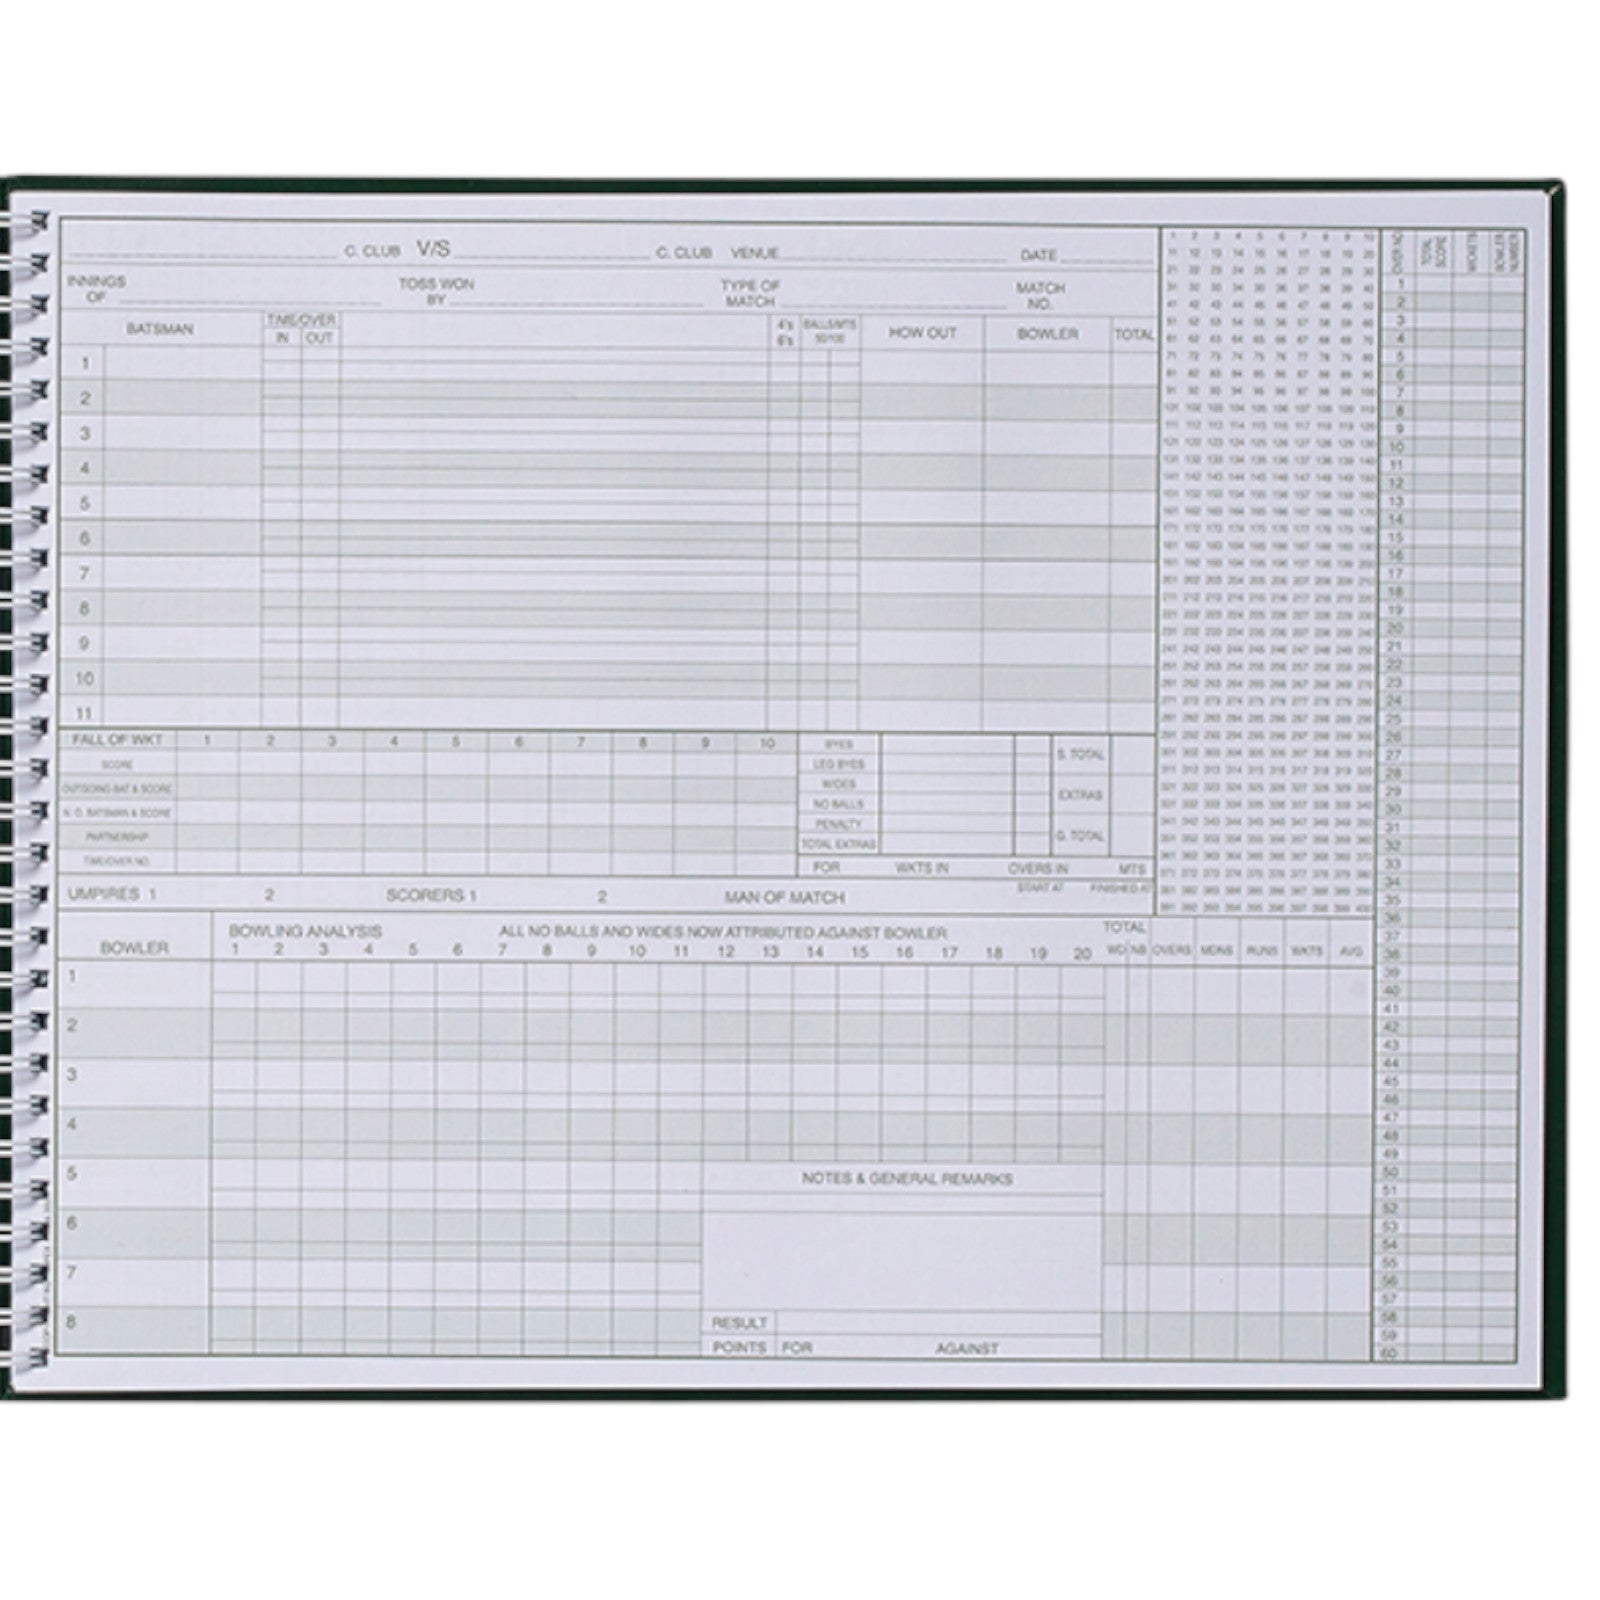 Cricket Score Card Book to record upto 100 Innings by Gunn & Moore Alternate 3